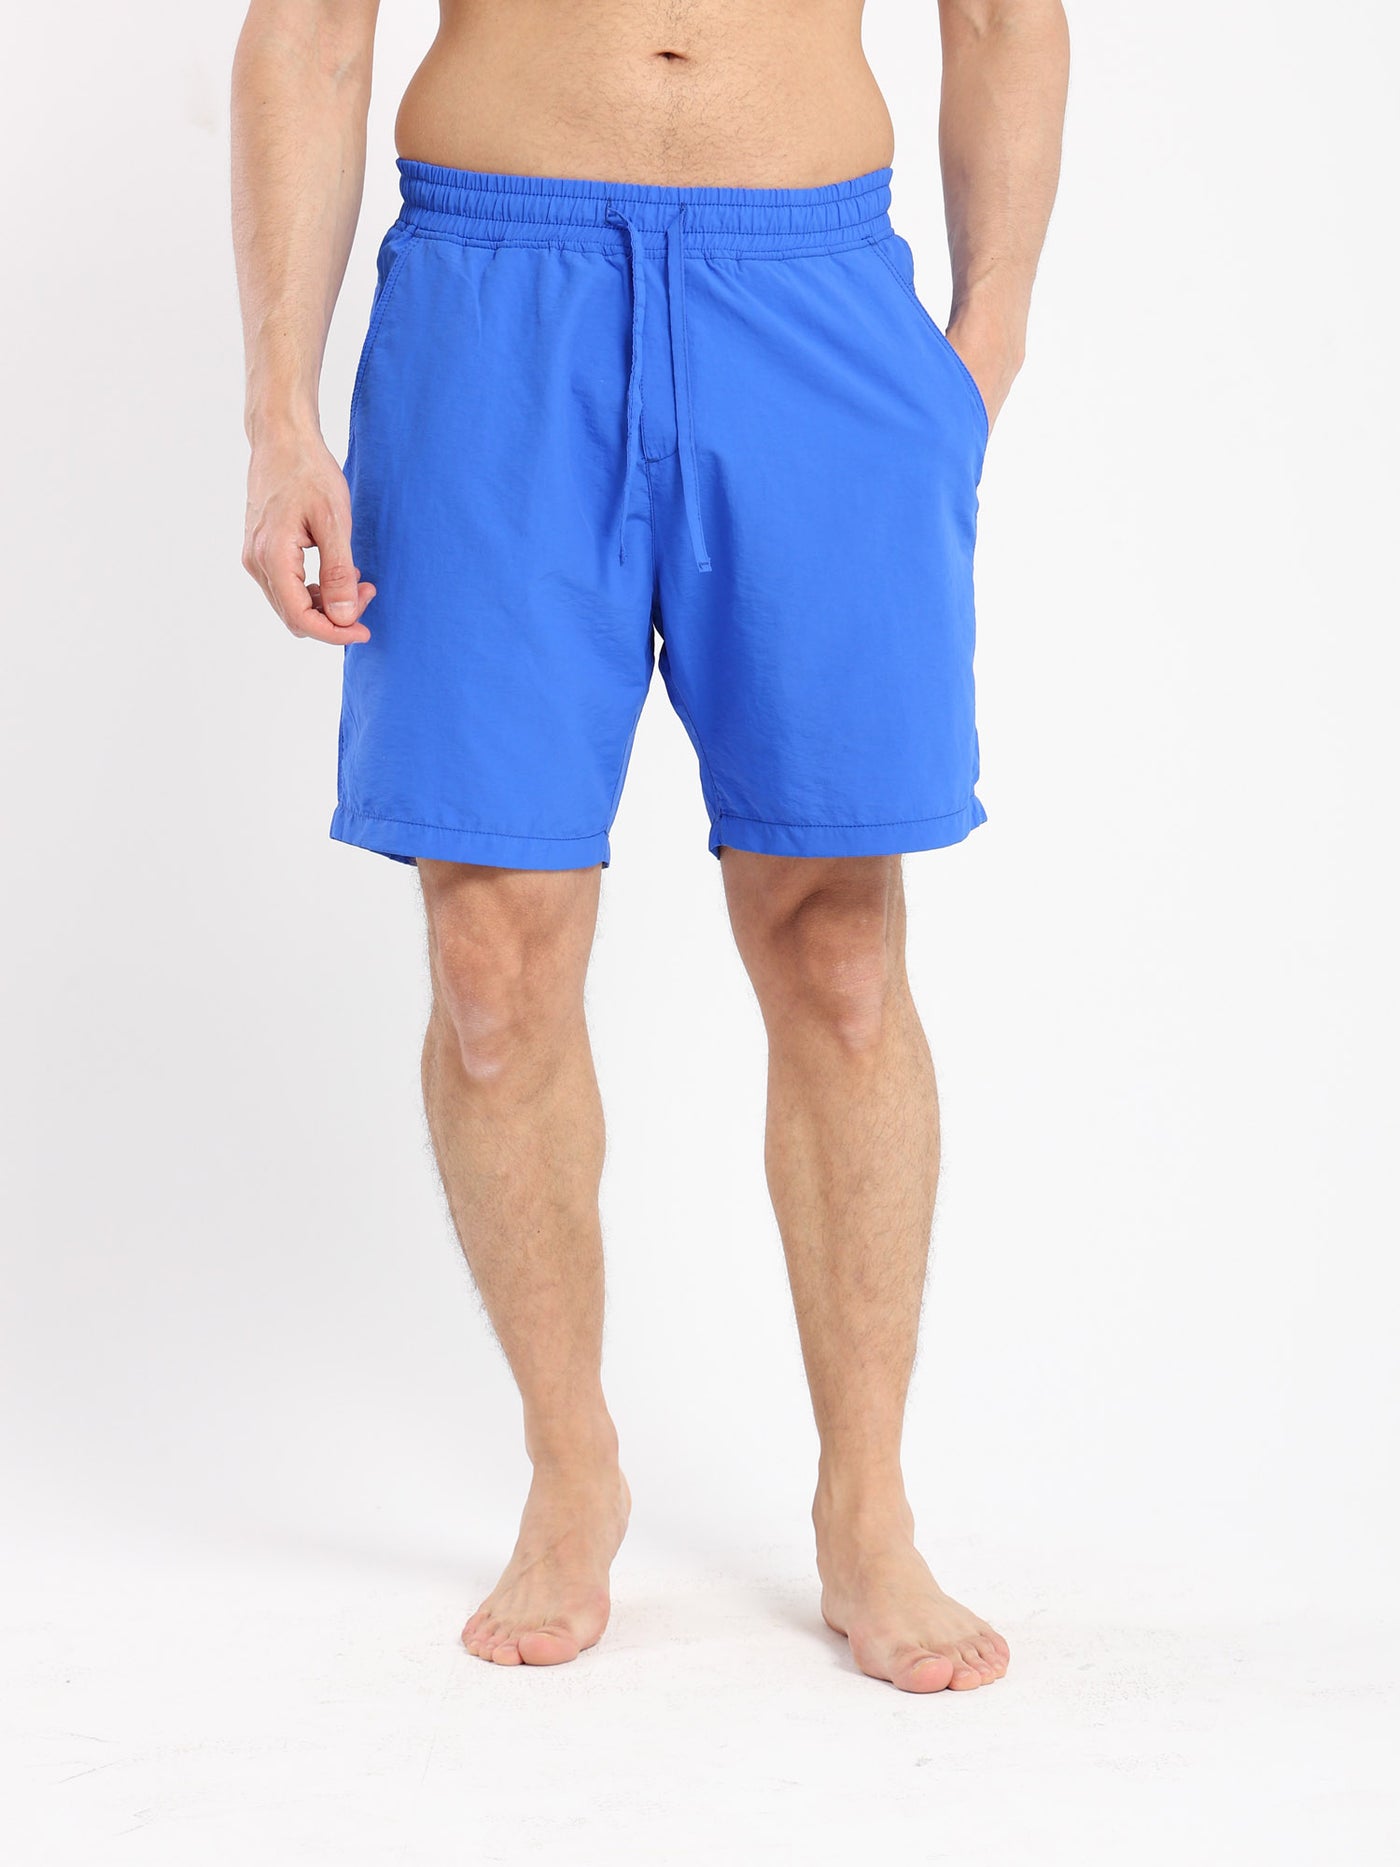 Swimshorts - Above Knee - With Drawstring